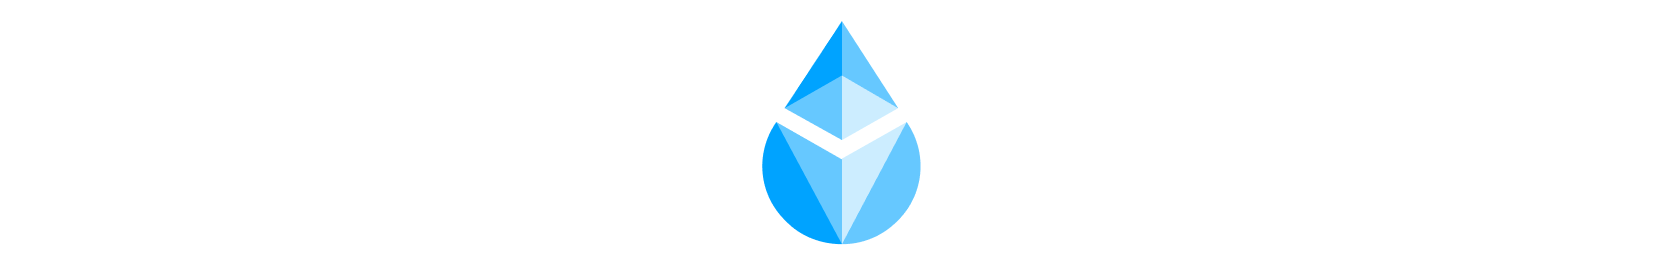 Staked ETH: 7.1m   Market share: 73.87%   30d change: +12.05%